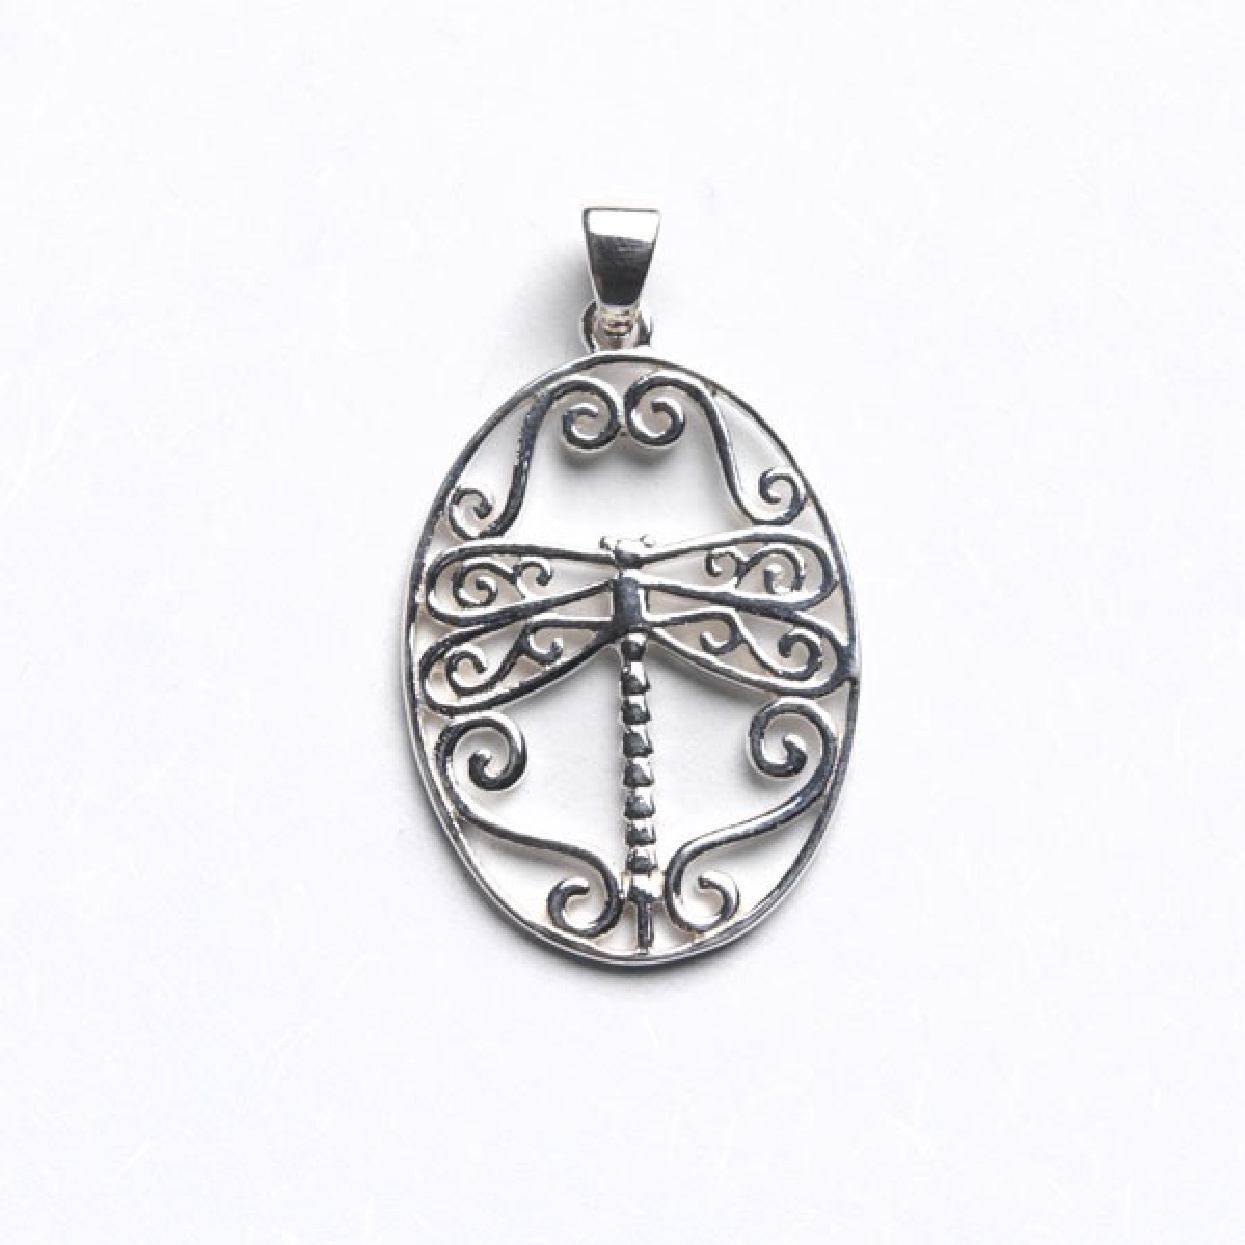 Southern Gates Sterling Silver Courtyard Small Dragonfly Pendant; 28x20mm

P920